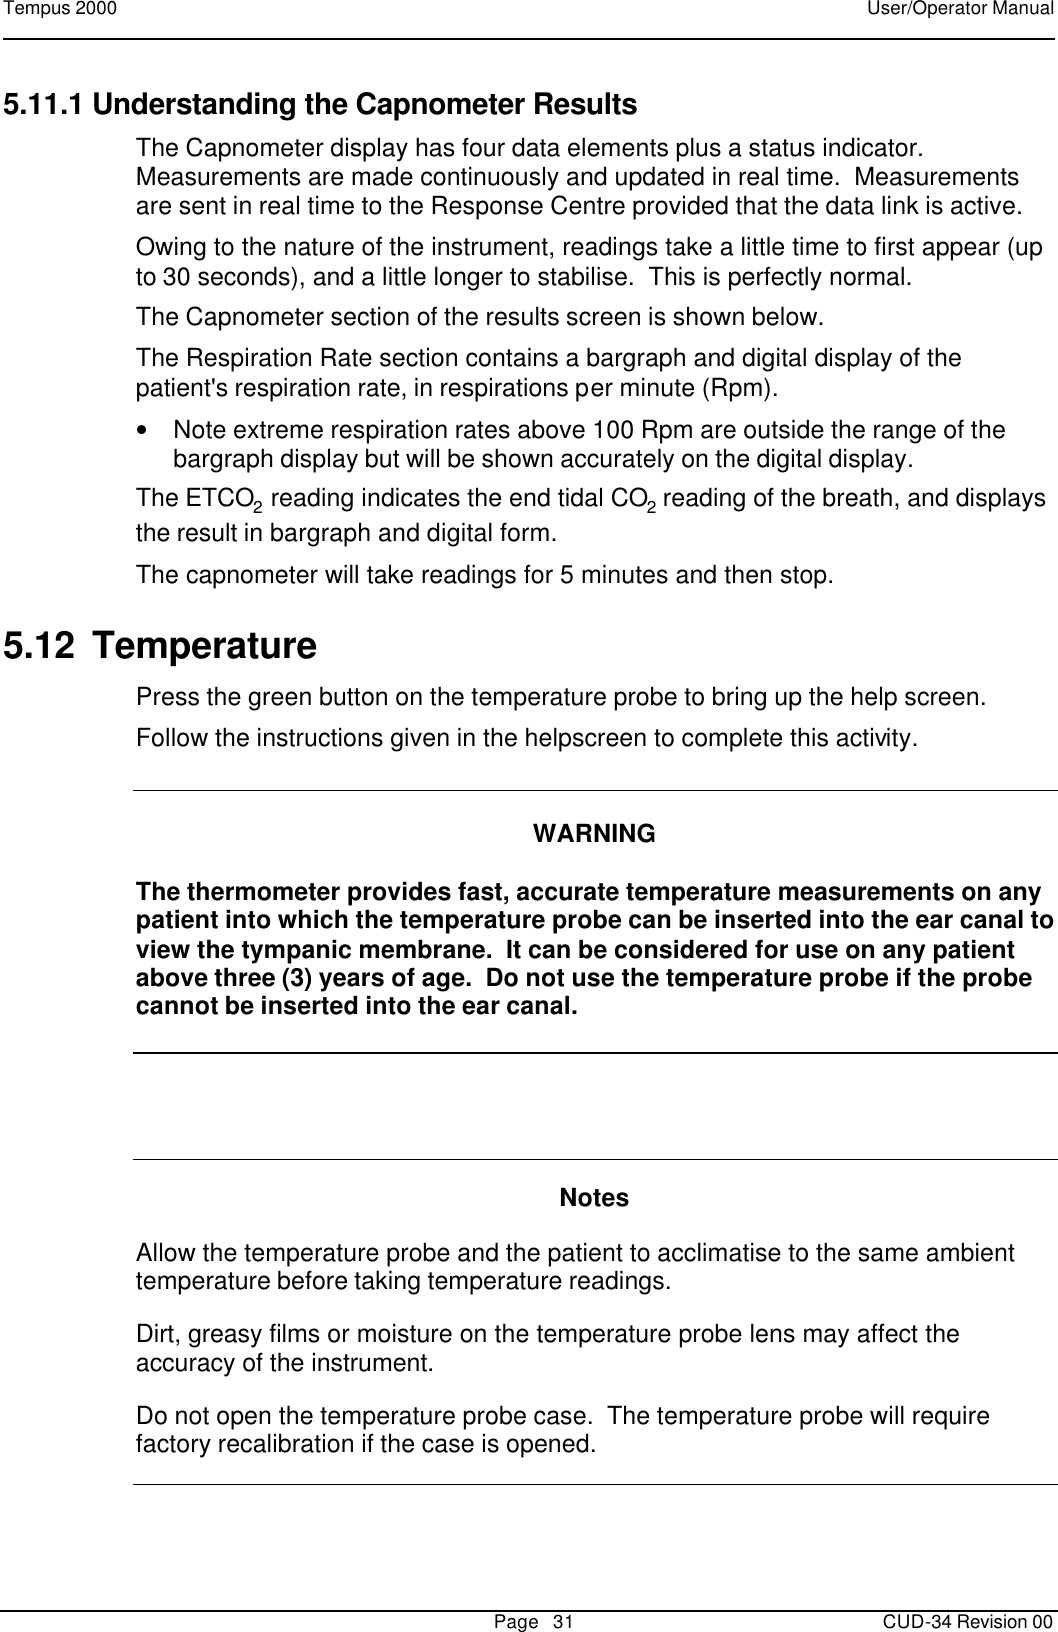 Tempus 2000    User/Operator Manual       Page   31   CUD-34 Revision 00 5.11.1 Understanding the Capnometer Results The Capnometer display has four data elements plus a status indicator.  Measurements are made continuously and updated in real time.  Measurements are sent in real time to the Response Centre provided that the data link is active.   Owing to the nature of the instrument, readings take a little time to first appear (up to 30 seconds), and a little longer to stabilise.  This is perfectly normal. The Capnometer section of the results screen is shown below.   The Respiration Rate section contains a bargraph and digital display of the patient&apos;s respiration rate, in respirations per minute (Rpm).   • Note extreme respiration rates above 100 Rpm are outside the range of the bargraph display but will be shown accurately on the digital display. The ETCO2 reading indicates the end tidal CO2 reading of the breath, and displays the result in bargraph and digital form. The capnometer will take readings for 5 minutes and then stop.   5.12 Temperature Press the green button on the temperature probe to bring up the help screen.   Follow the instructions given in the helpscreen to complete this activity.   WARNING  The thermometer provides fast, accurate temperature measurements on any patient into which the temperature probe can be inserted into the ear canal to view the tympanic membrane.  It can be considered for use on any patient above three (3) years of age.  Do not use the temperature probe if the probe cannot be inserted into the ear canal.     Notes  Allow the temperature probe and the patient to acclimatise to the same ambient temperature before taking temperature readings.  Dirt, greasy films or moisture on the temperature probe lens may affect the accuracy of the instrument.  Do not open the temperature probe case.  The temperature probe will require factory recalibration if the case is opened.   